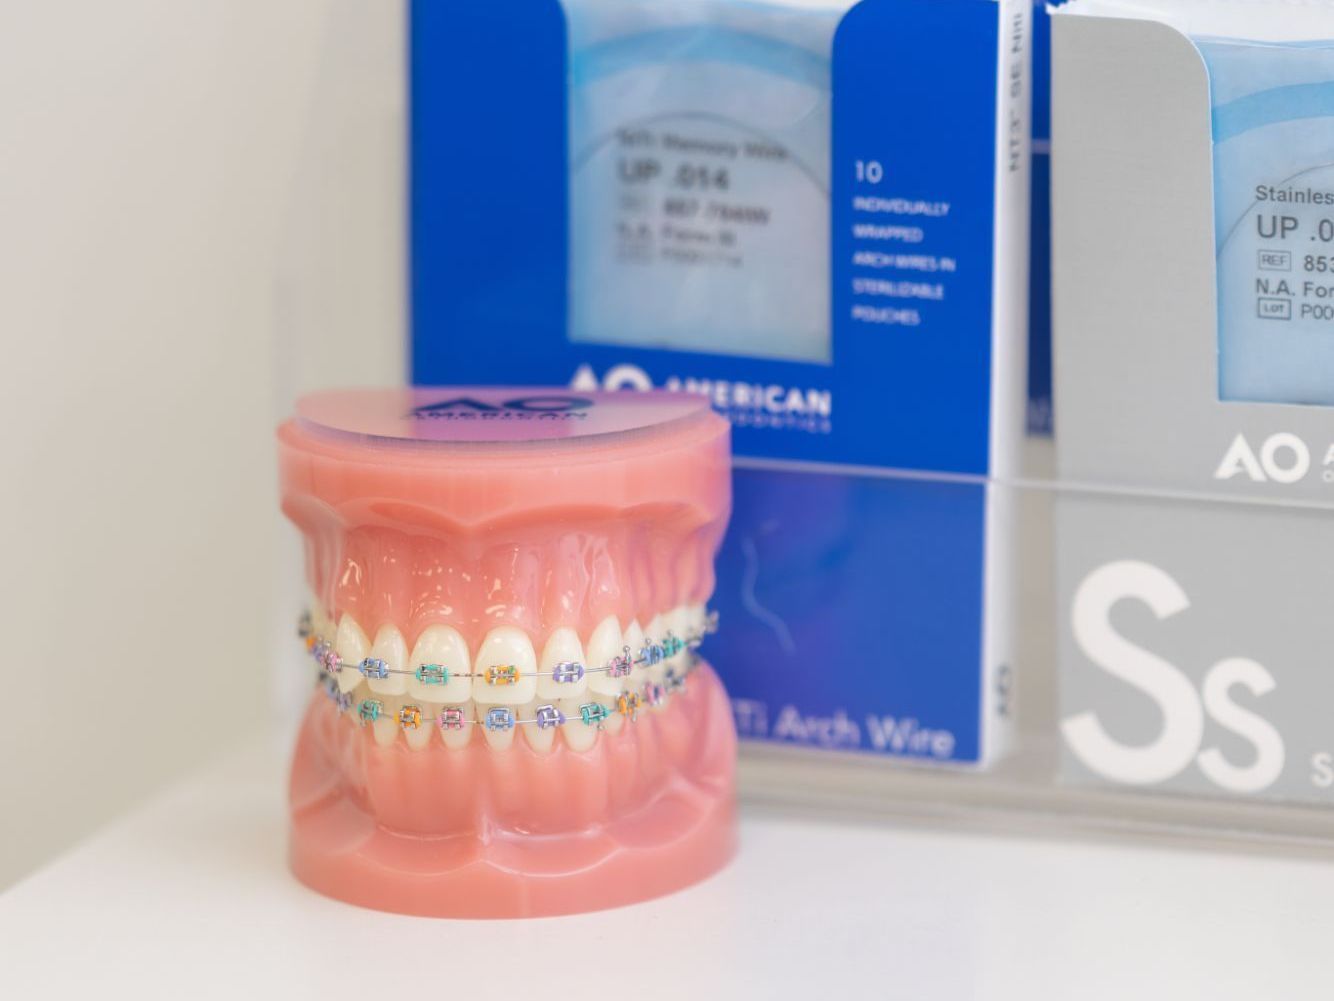 a box of american arch wire sits next to a model of teeth